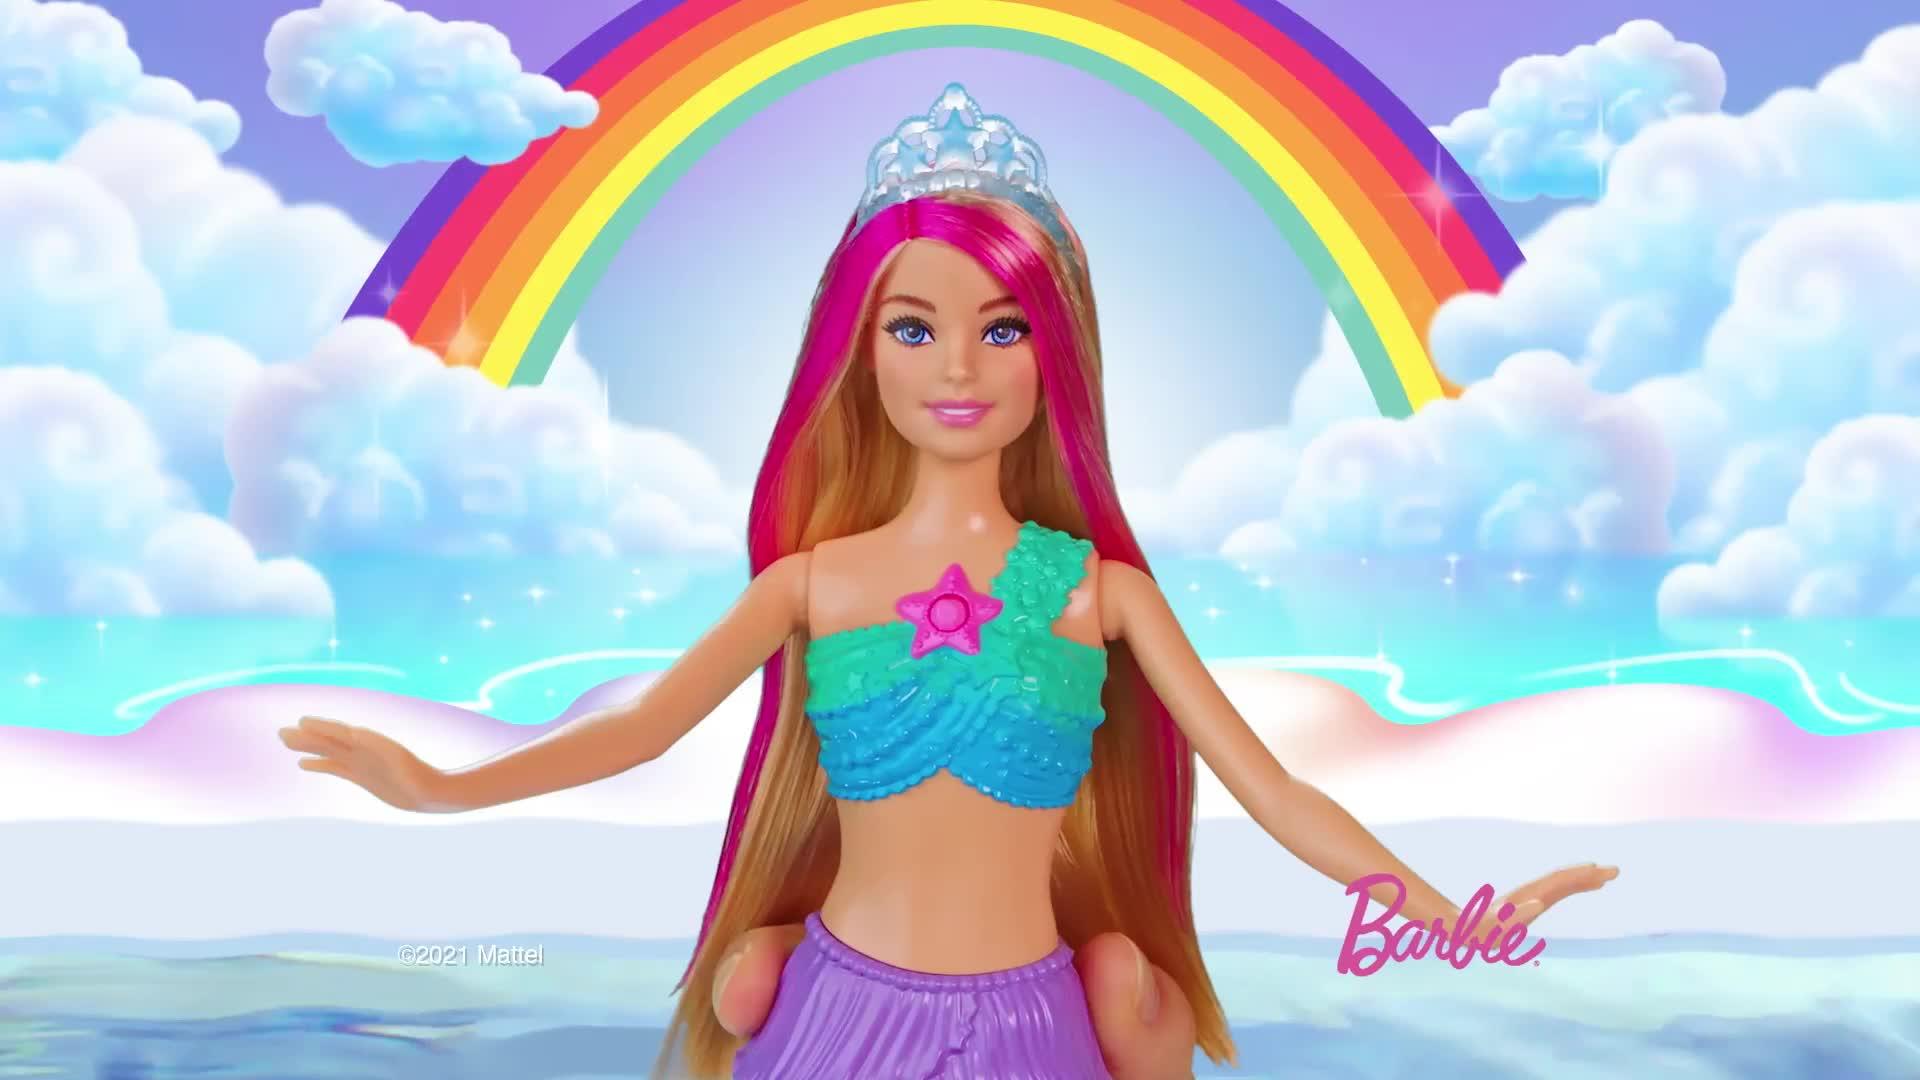 Barbie mermaid • Compare (62 products) see prices »